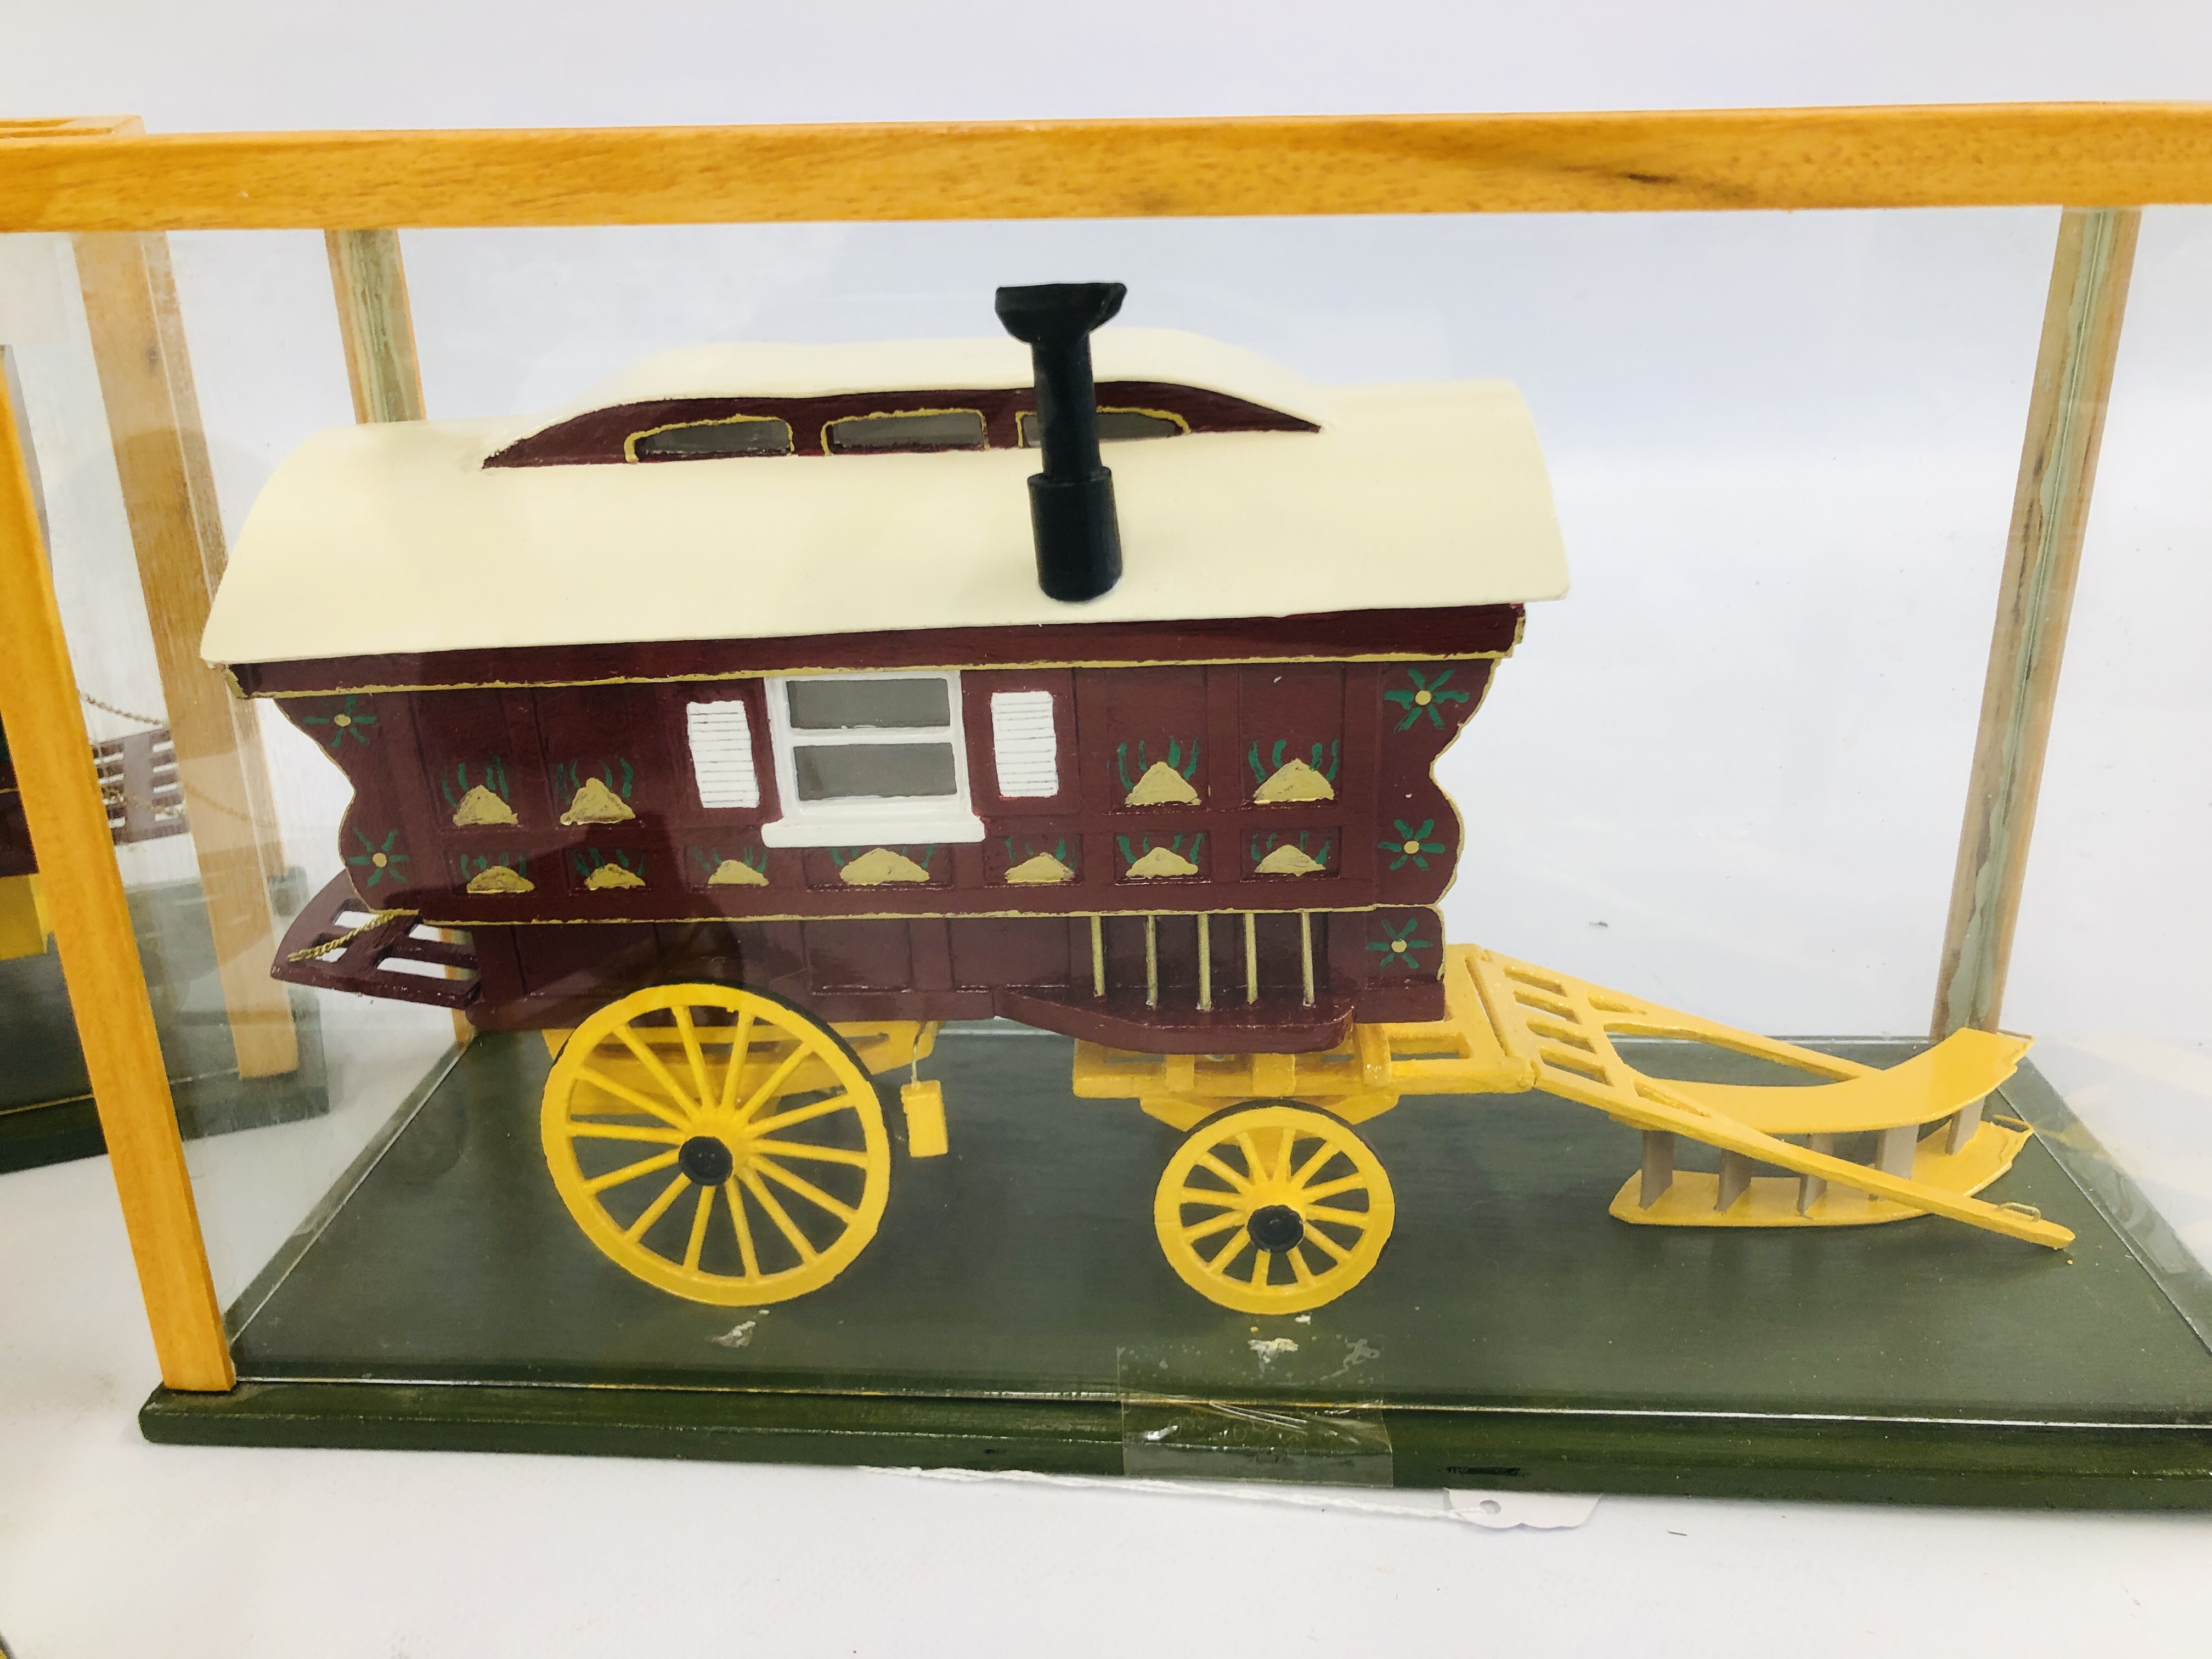 TWO WOODEN SCRATCH BUILT TRADITIONAL CARAVANS IN GLASS DISPLAY CASES ALONG WITH A FURTHER WOODEN - Image 4 of 6